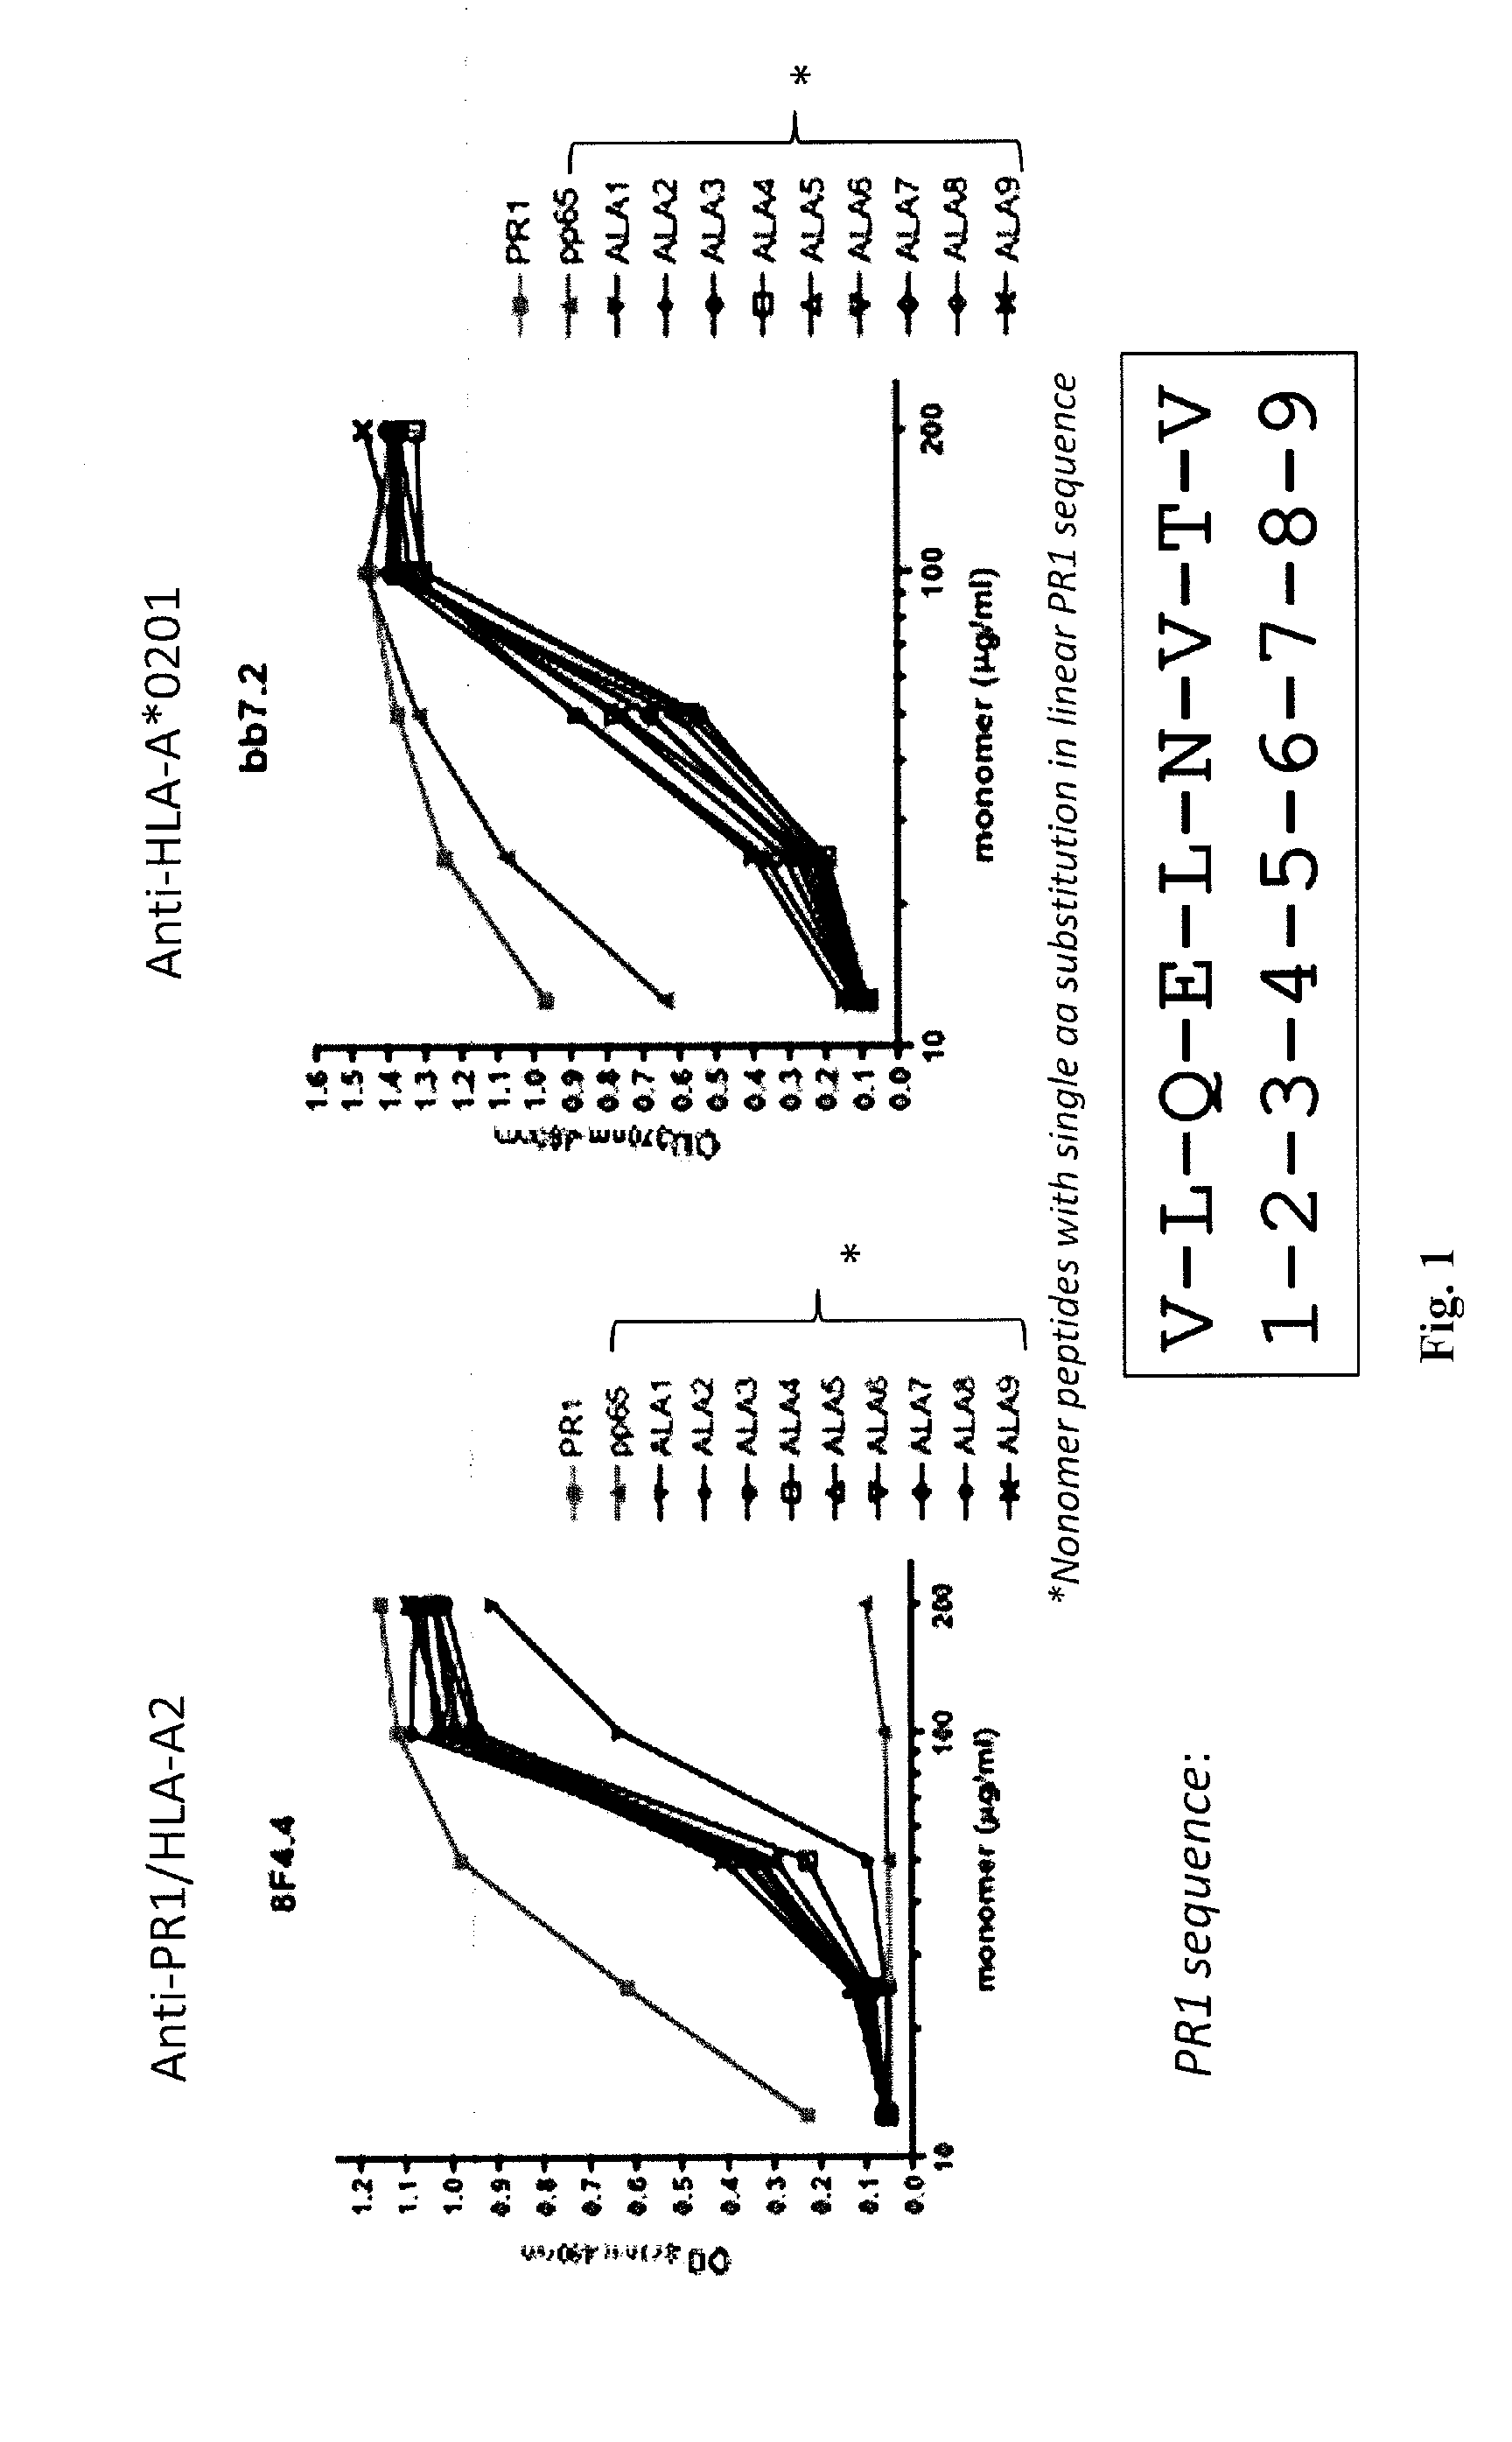 Monoclonal Antibodies For Use In Diagnosis and Therapy of Cancers and Autoimmune Disease